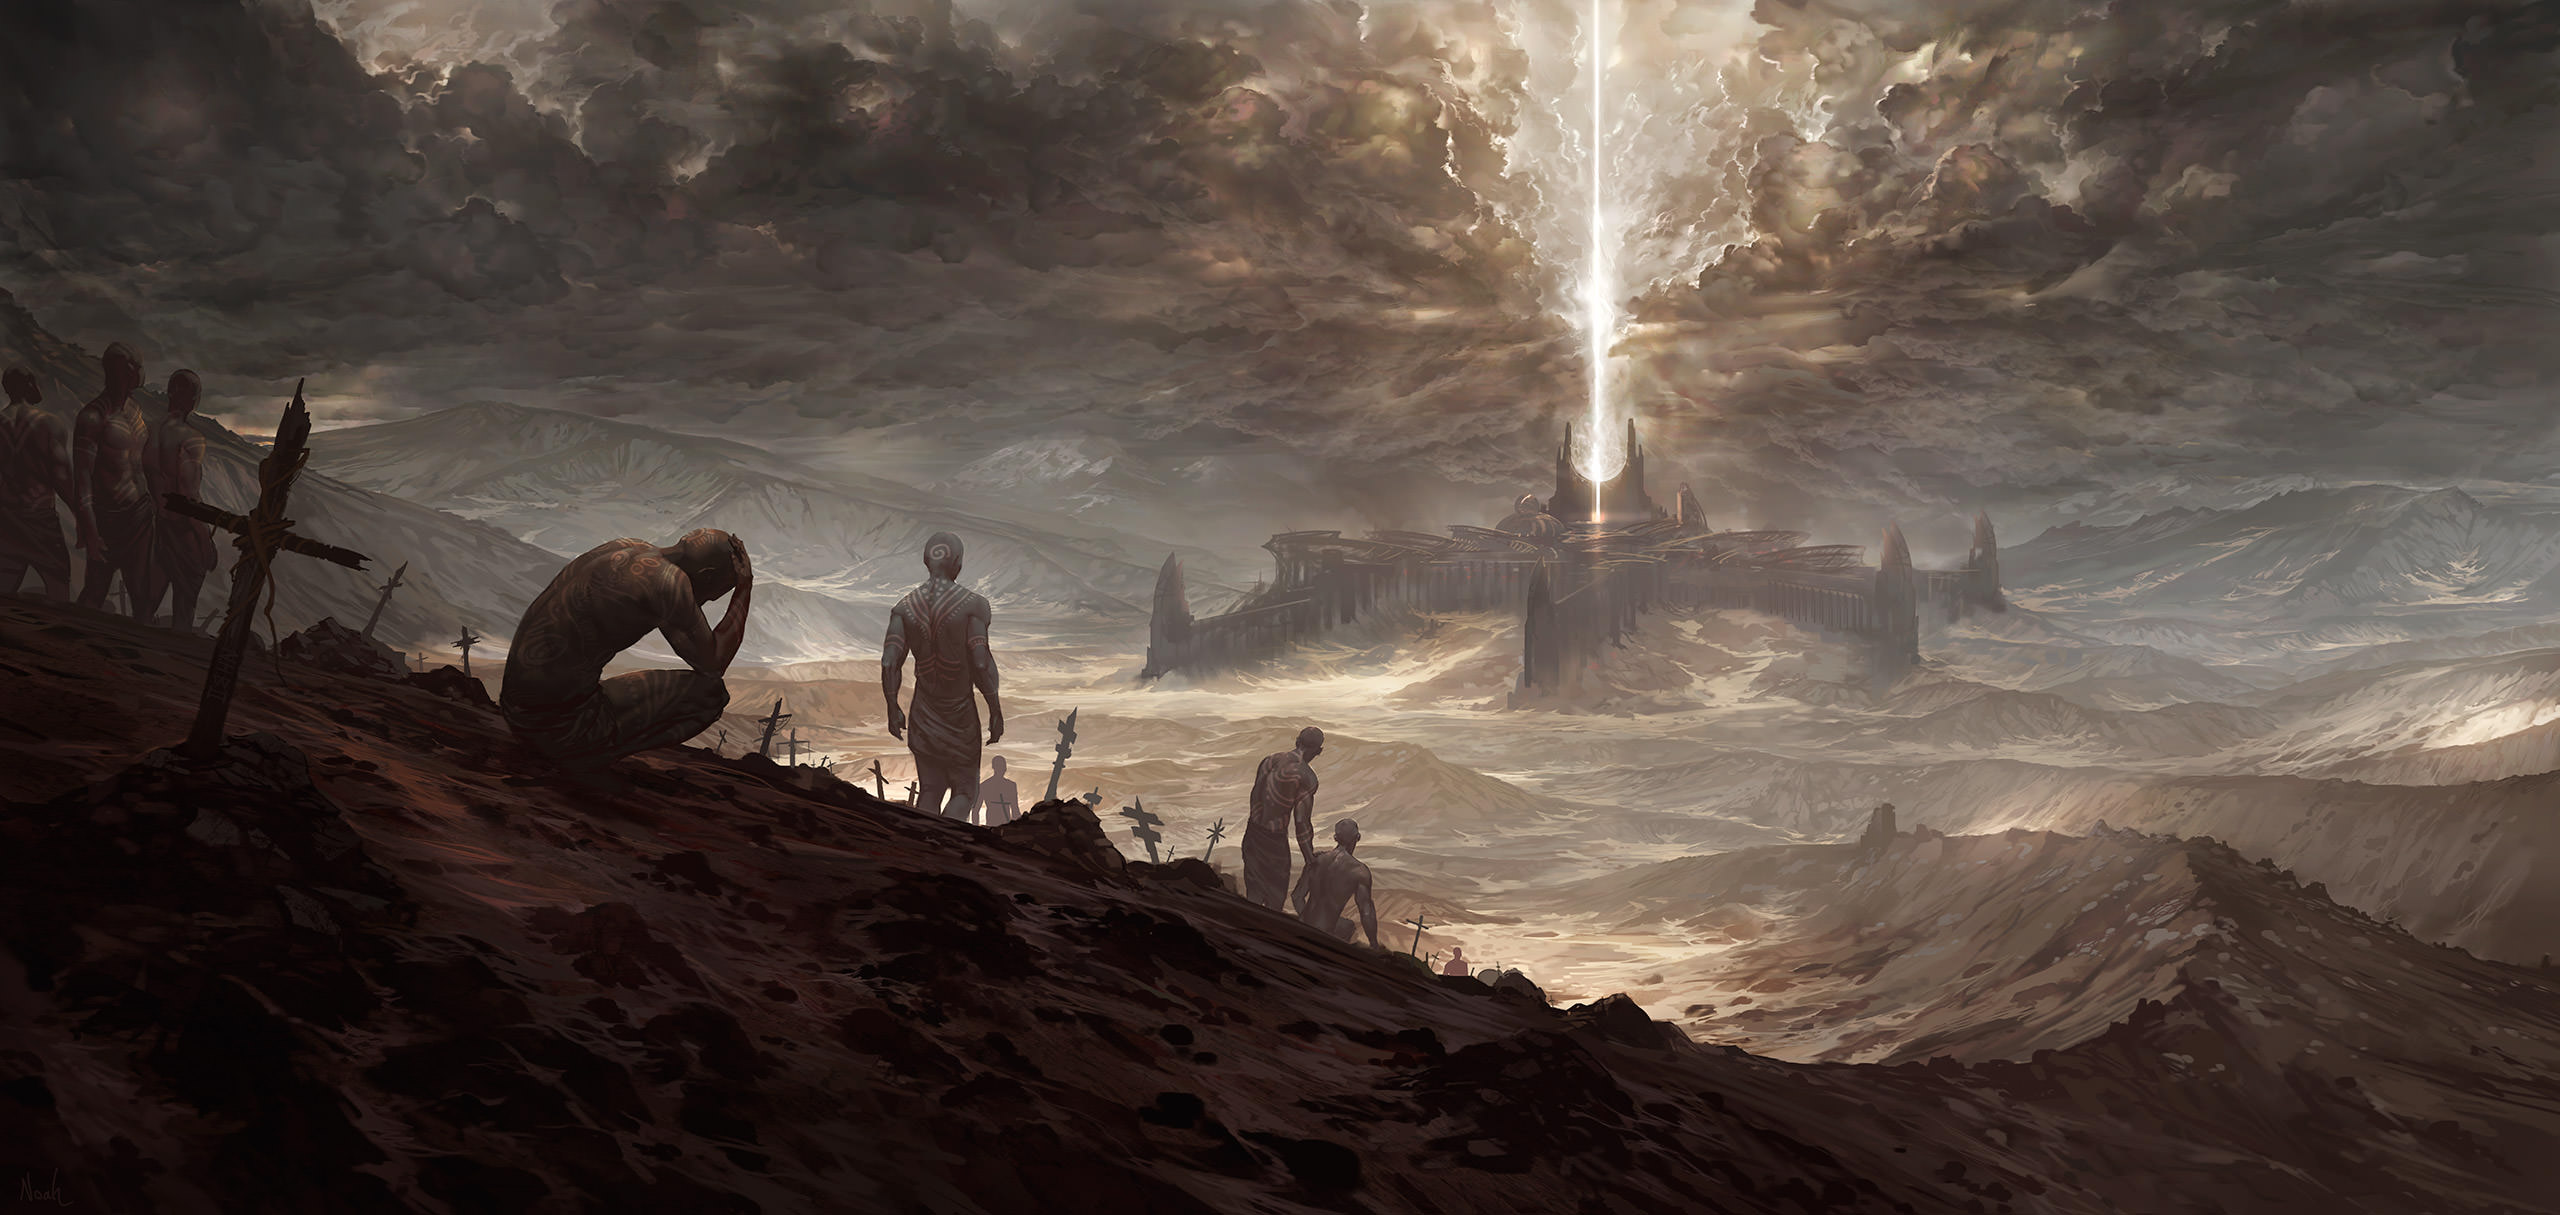 For All That Could Have Been by Noah Bradley